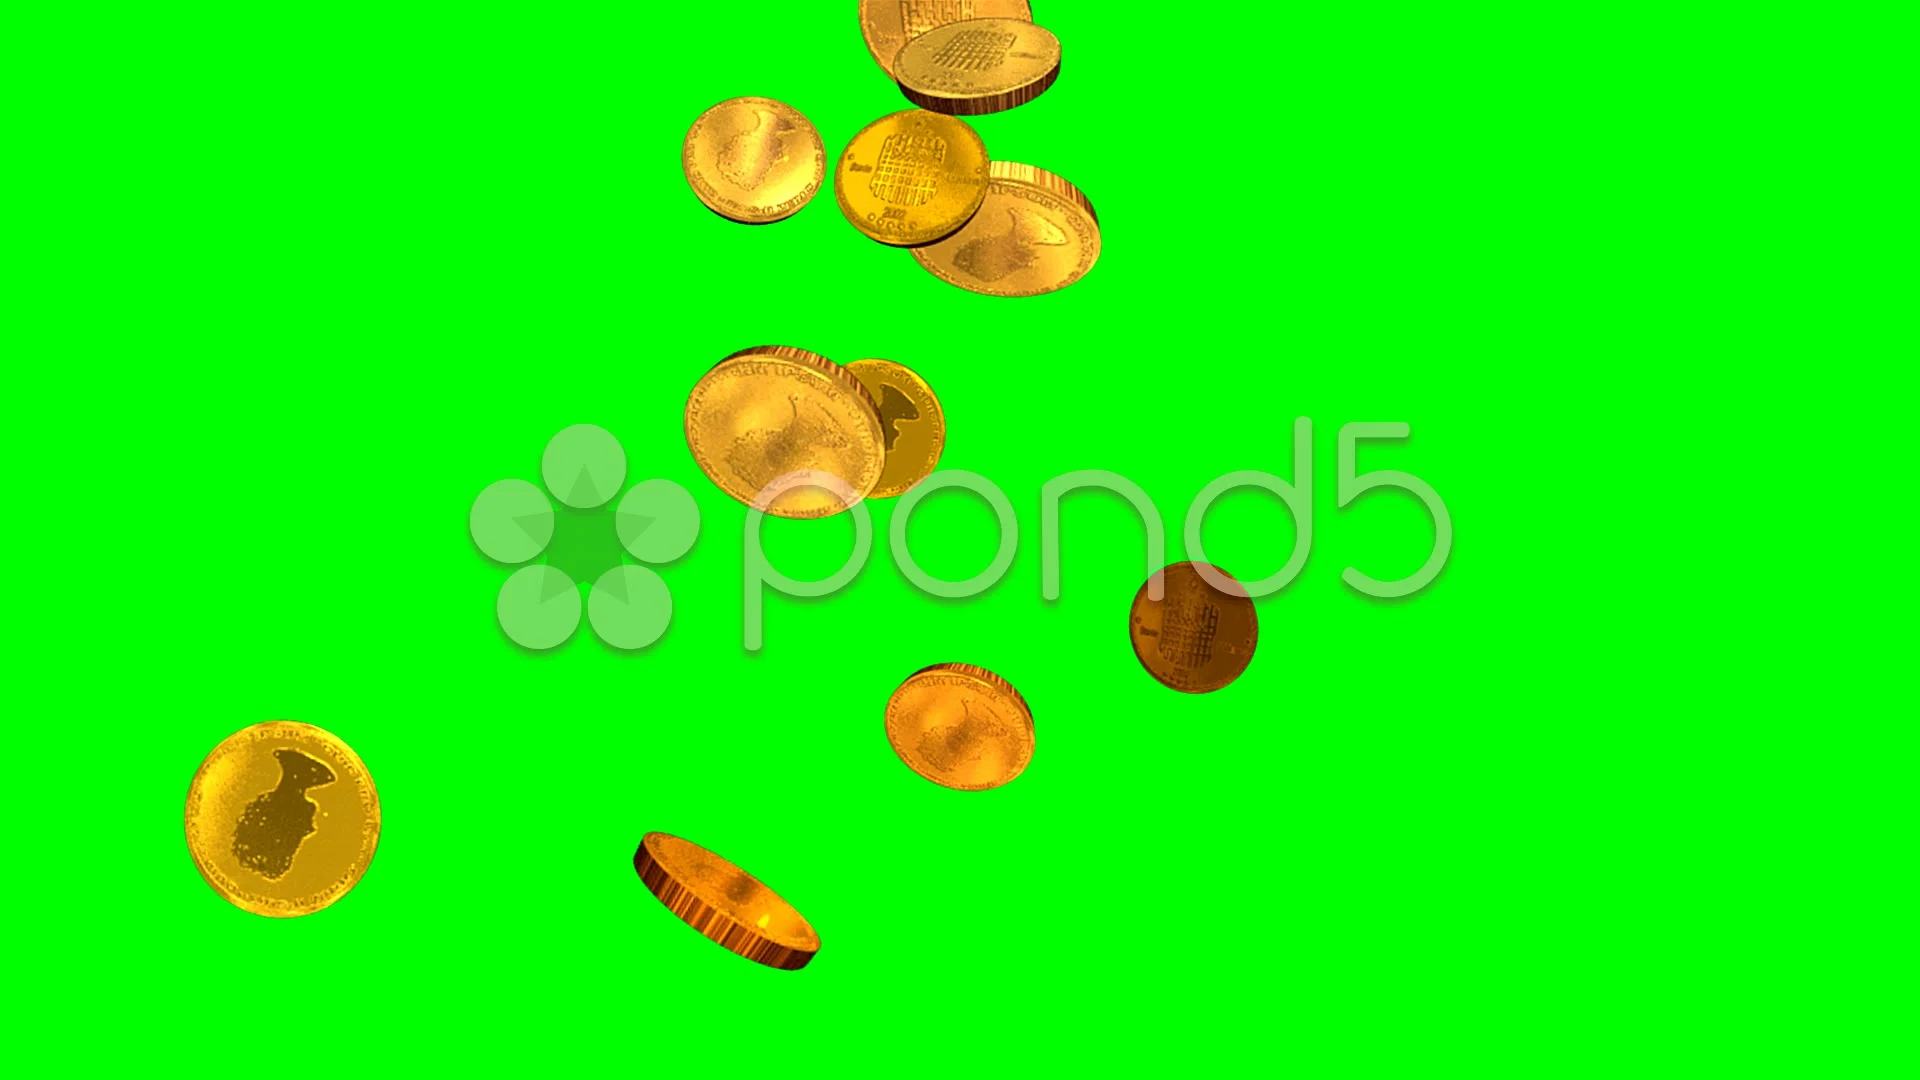 Gold Coin Rotation Green Screen Video Video MOV Template Free Download - Pikbest